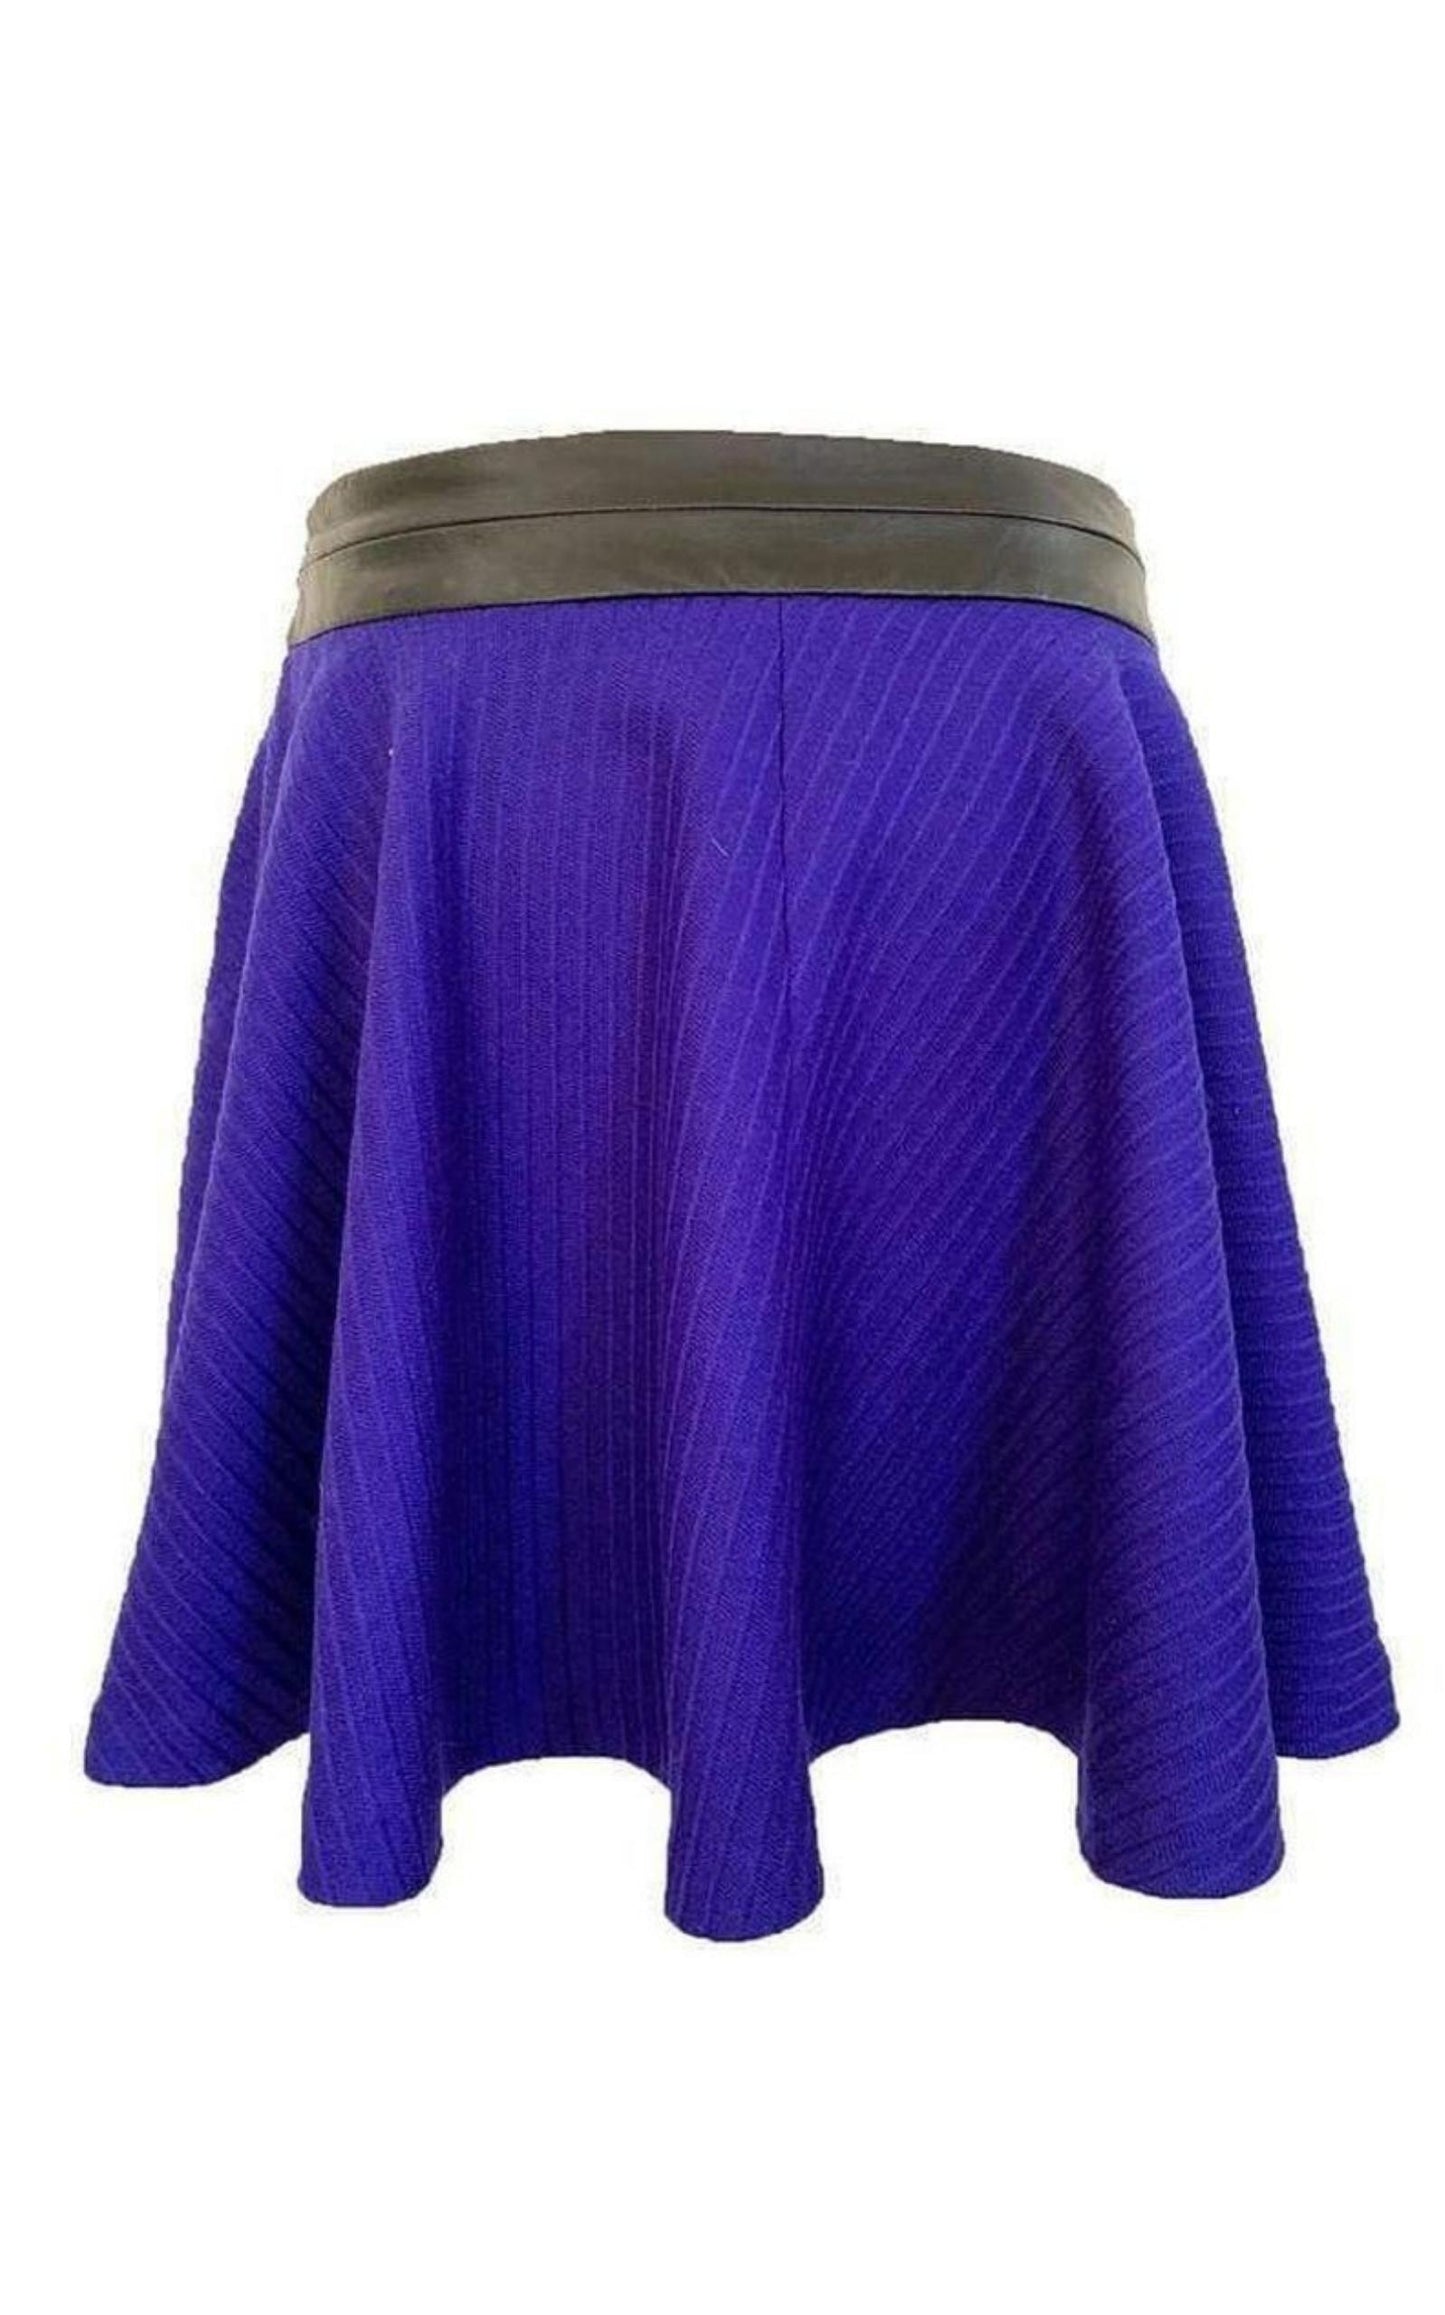 Milly Runway MILLY 'Delphine' Circle Skirt